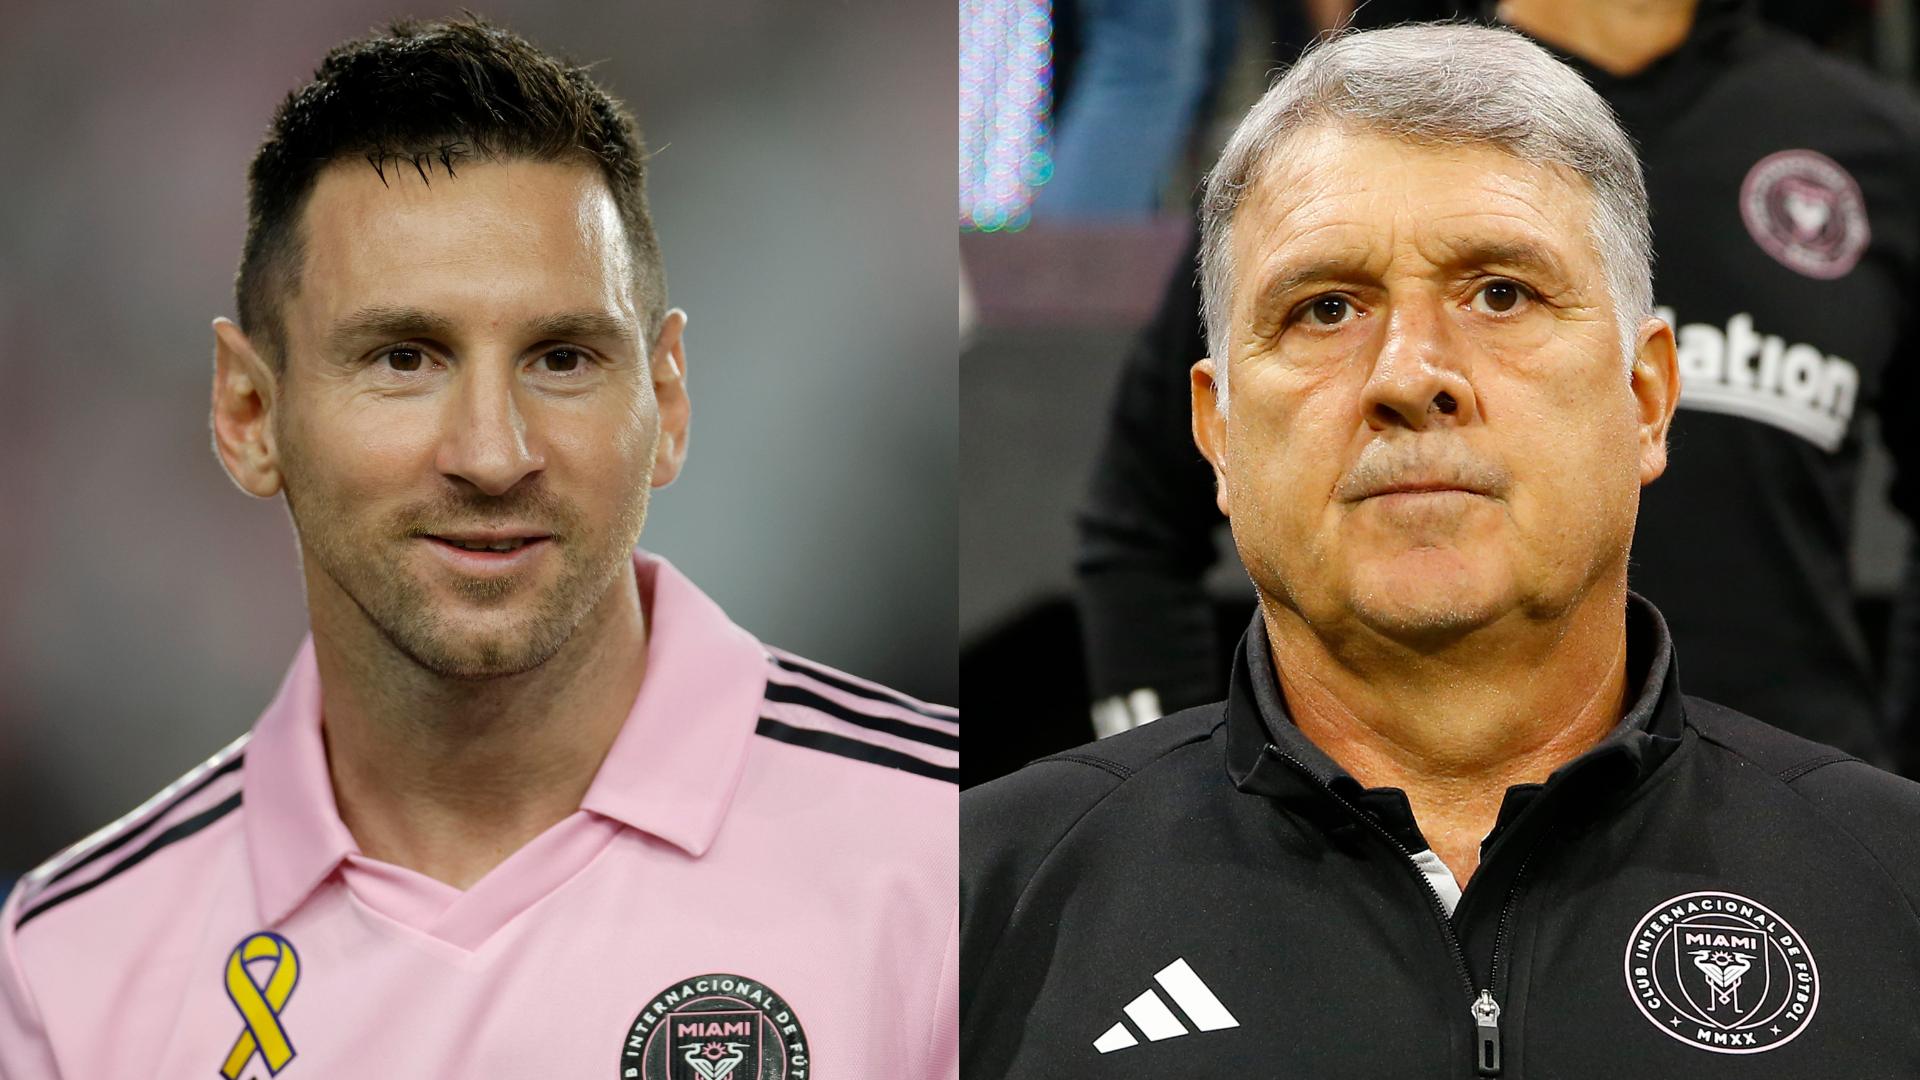 There's still hope for Lionel Messi! Tata Martino confirms Inter Miami star could feature in U.S. Open Cup final despite missing training - but Jordi Alba ruled out